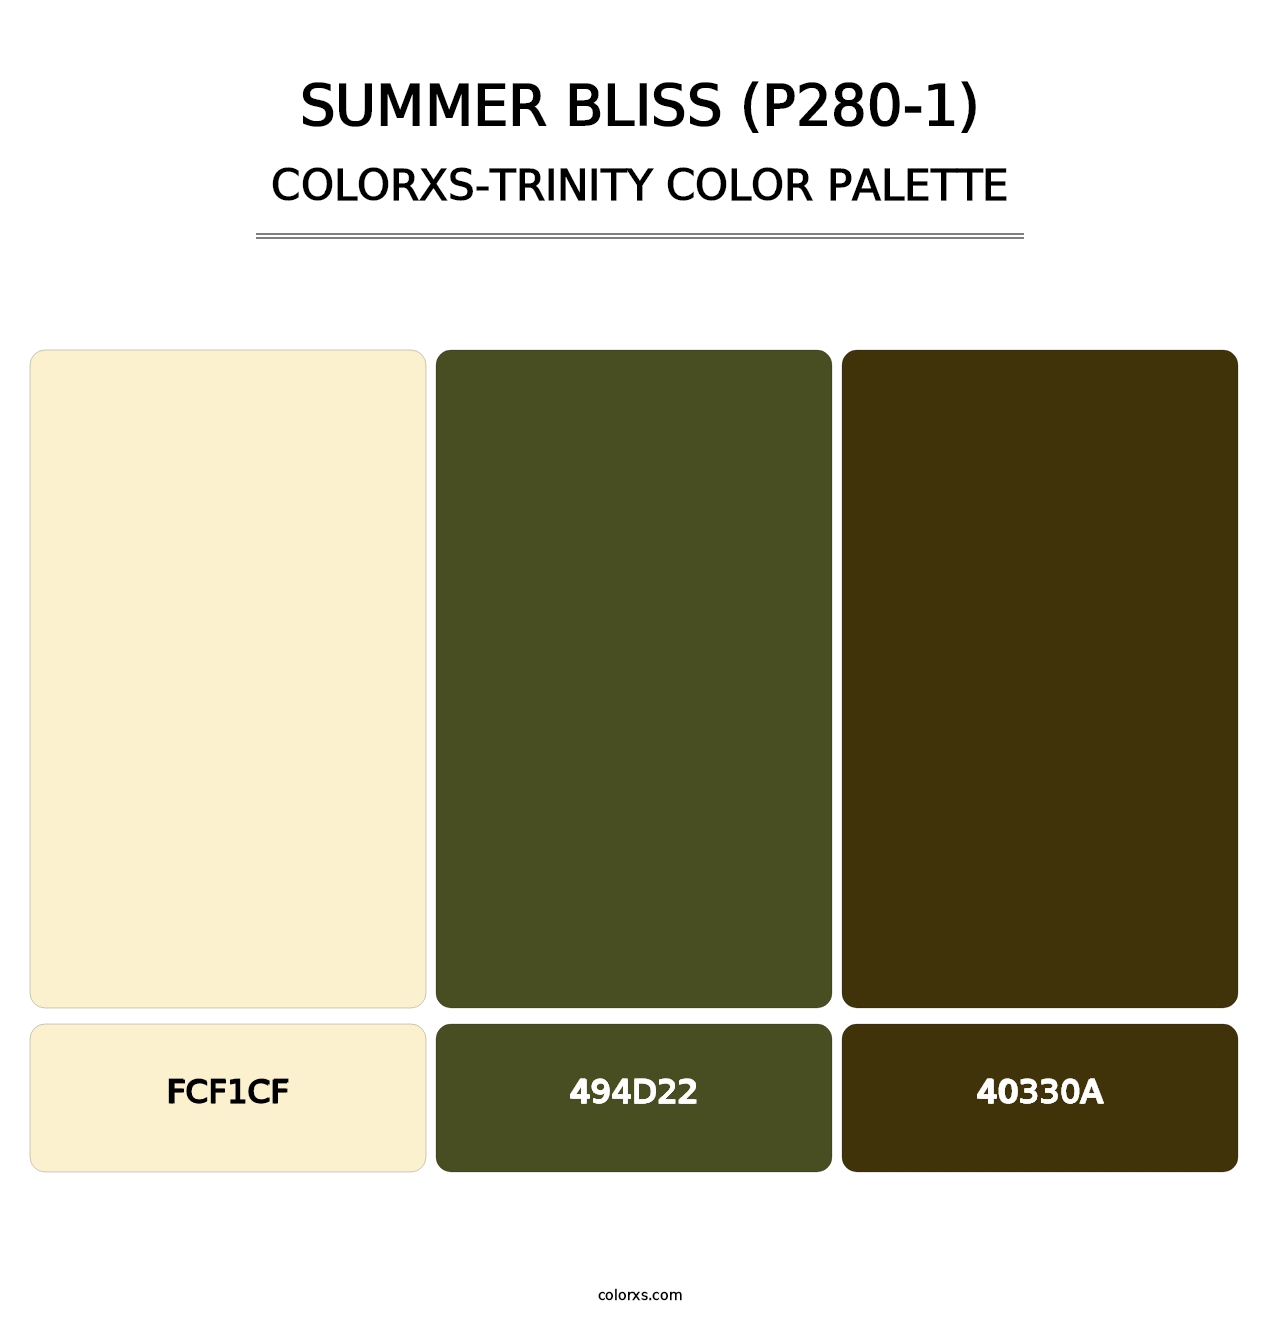 Summer Bliss (P280-1) - Colorxs Trinity Palette